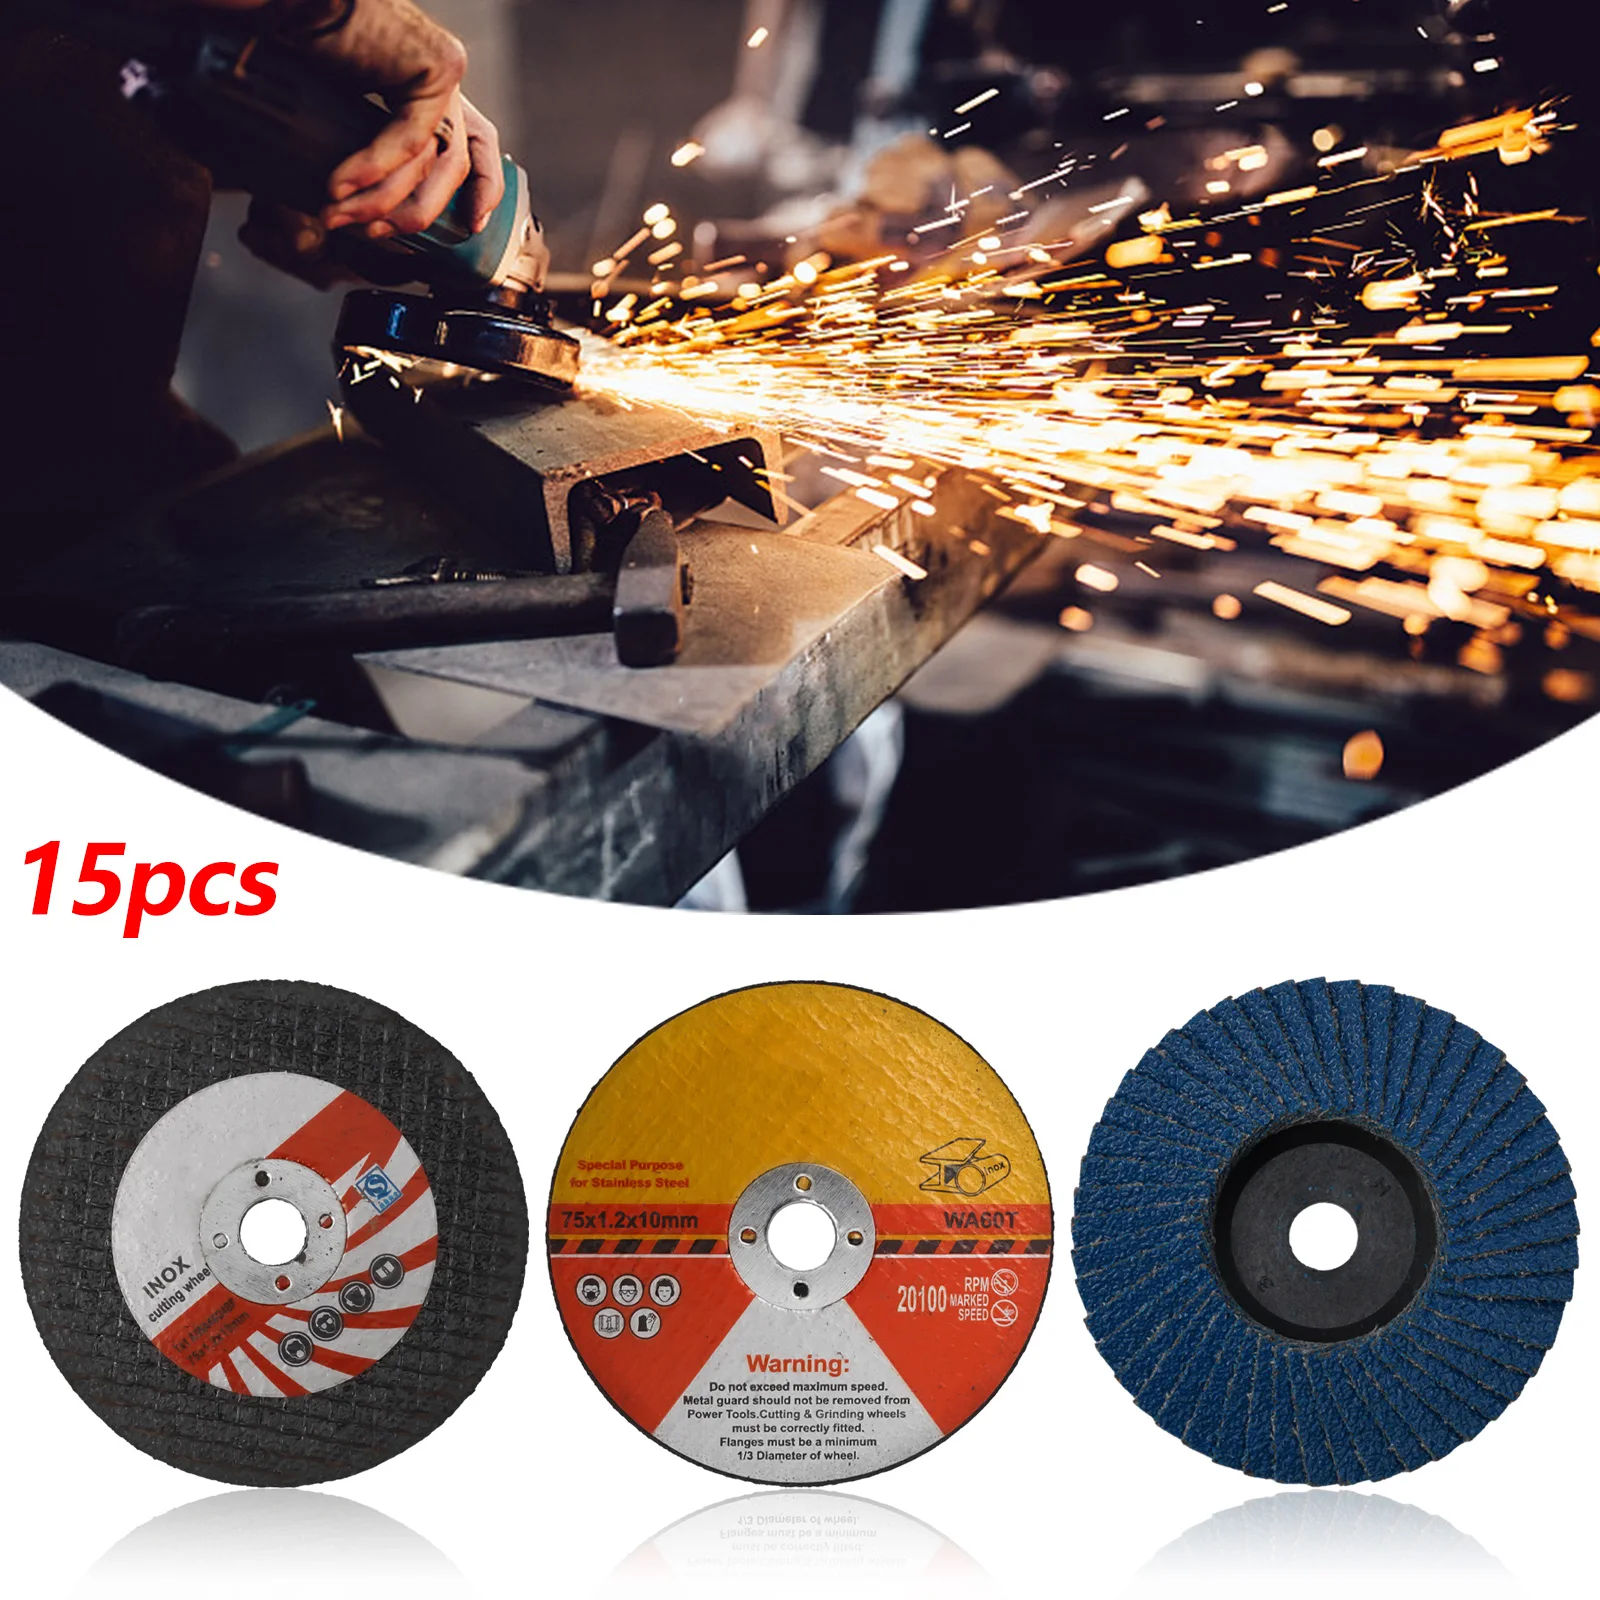 

15pc Circular Resin Grinding Wheel Saw Blades Cutting Wheel Disc For Metal Cutting For Angle Grinder Power Tools Accessories